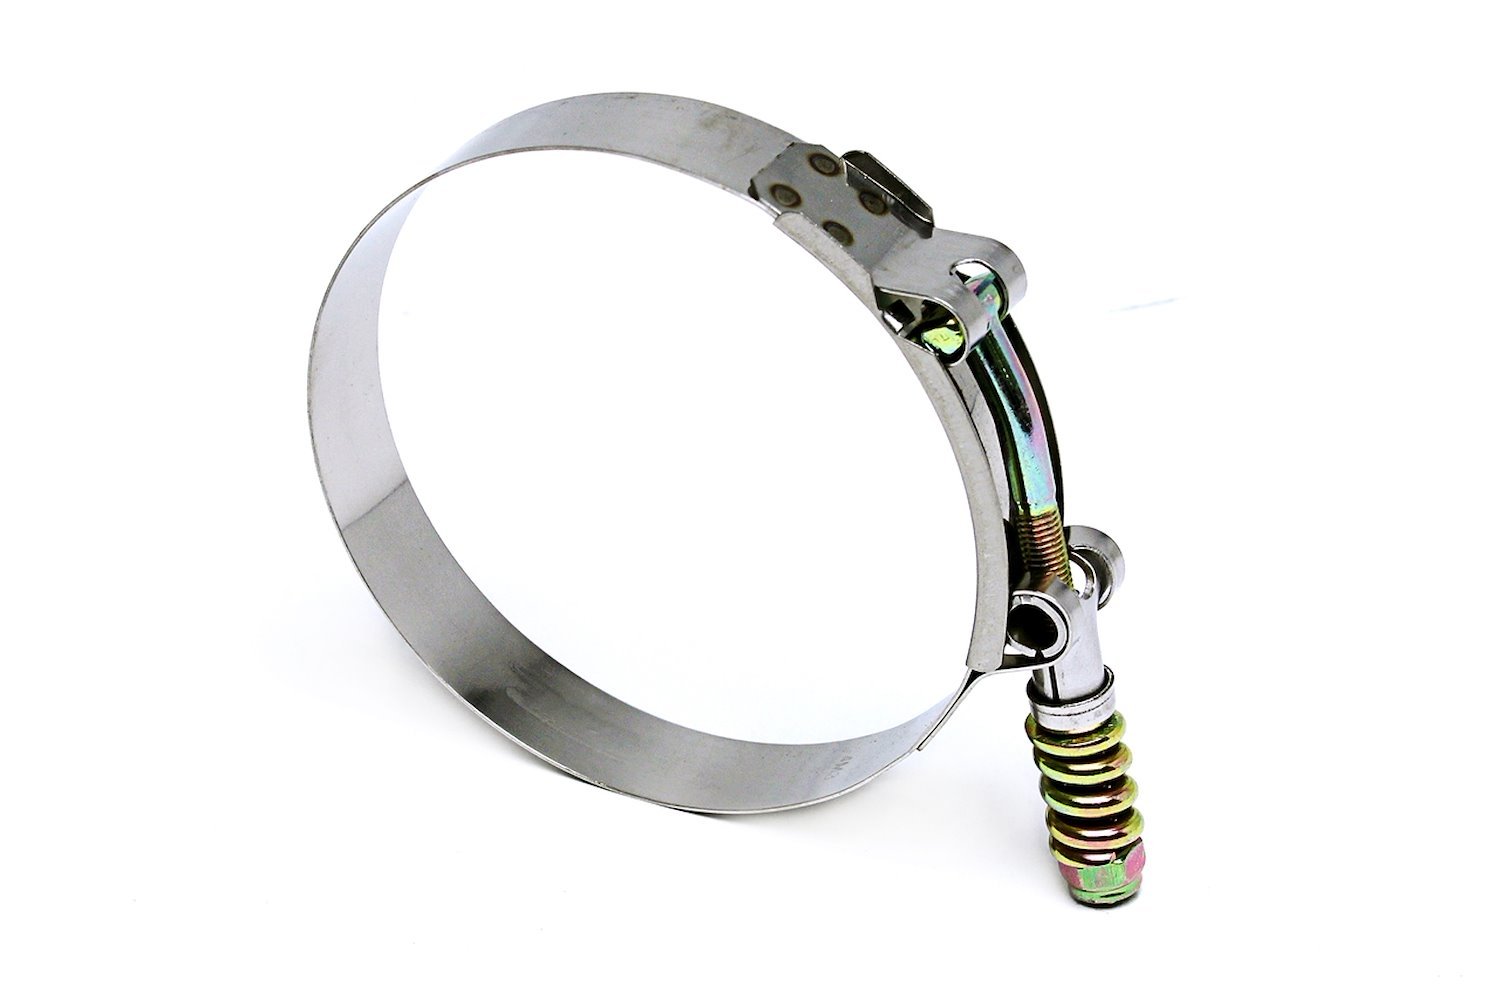 SLTC-775 Stainless Steel Spring Loaded T-Bolt Hose Clamp, Size #220, Range: 7.75 in.-8.06 in.